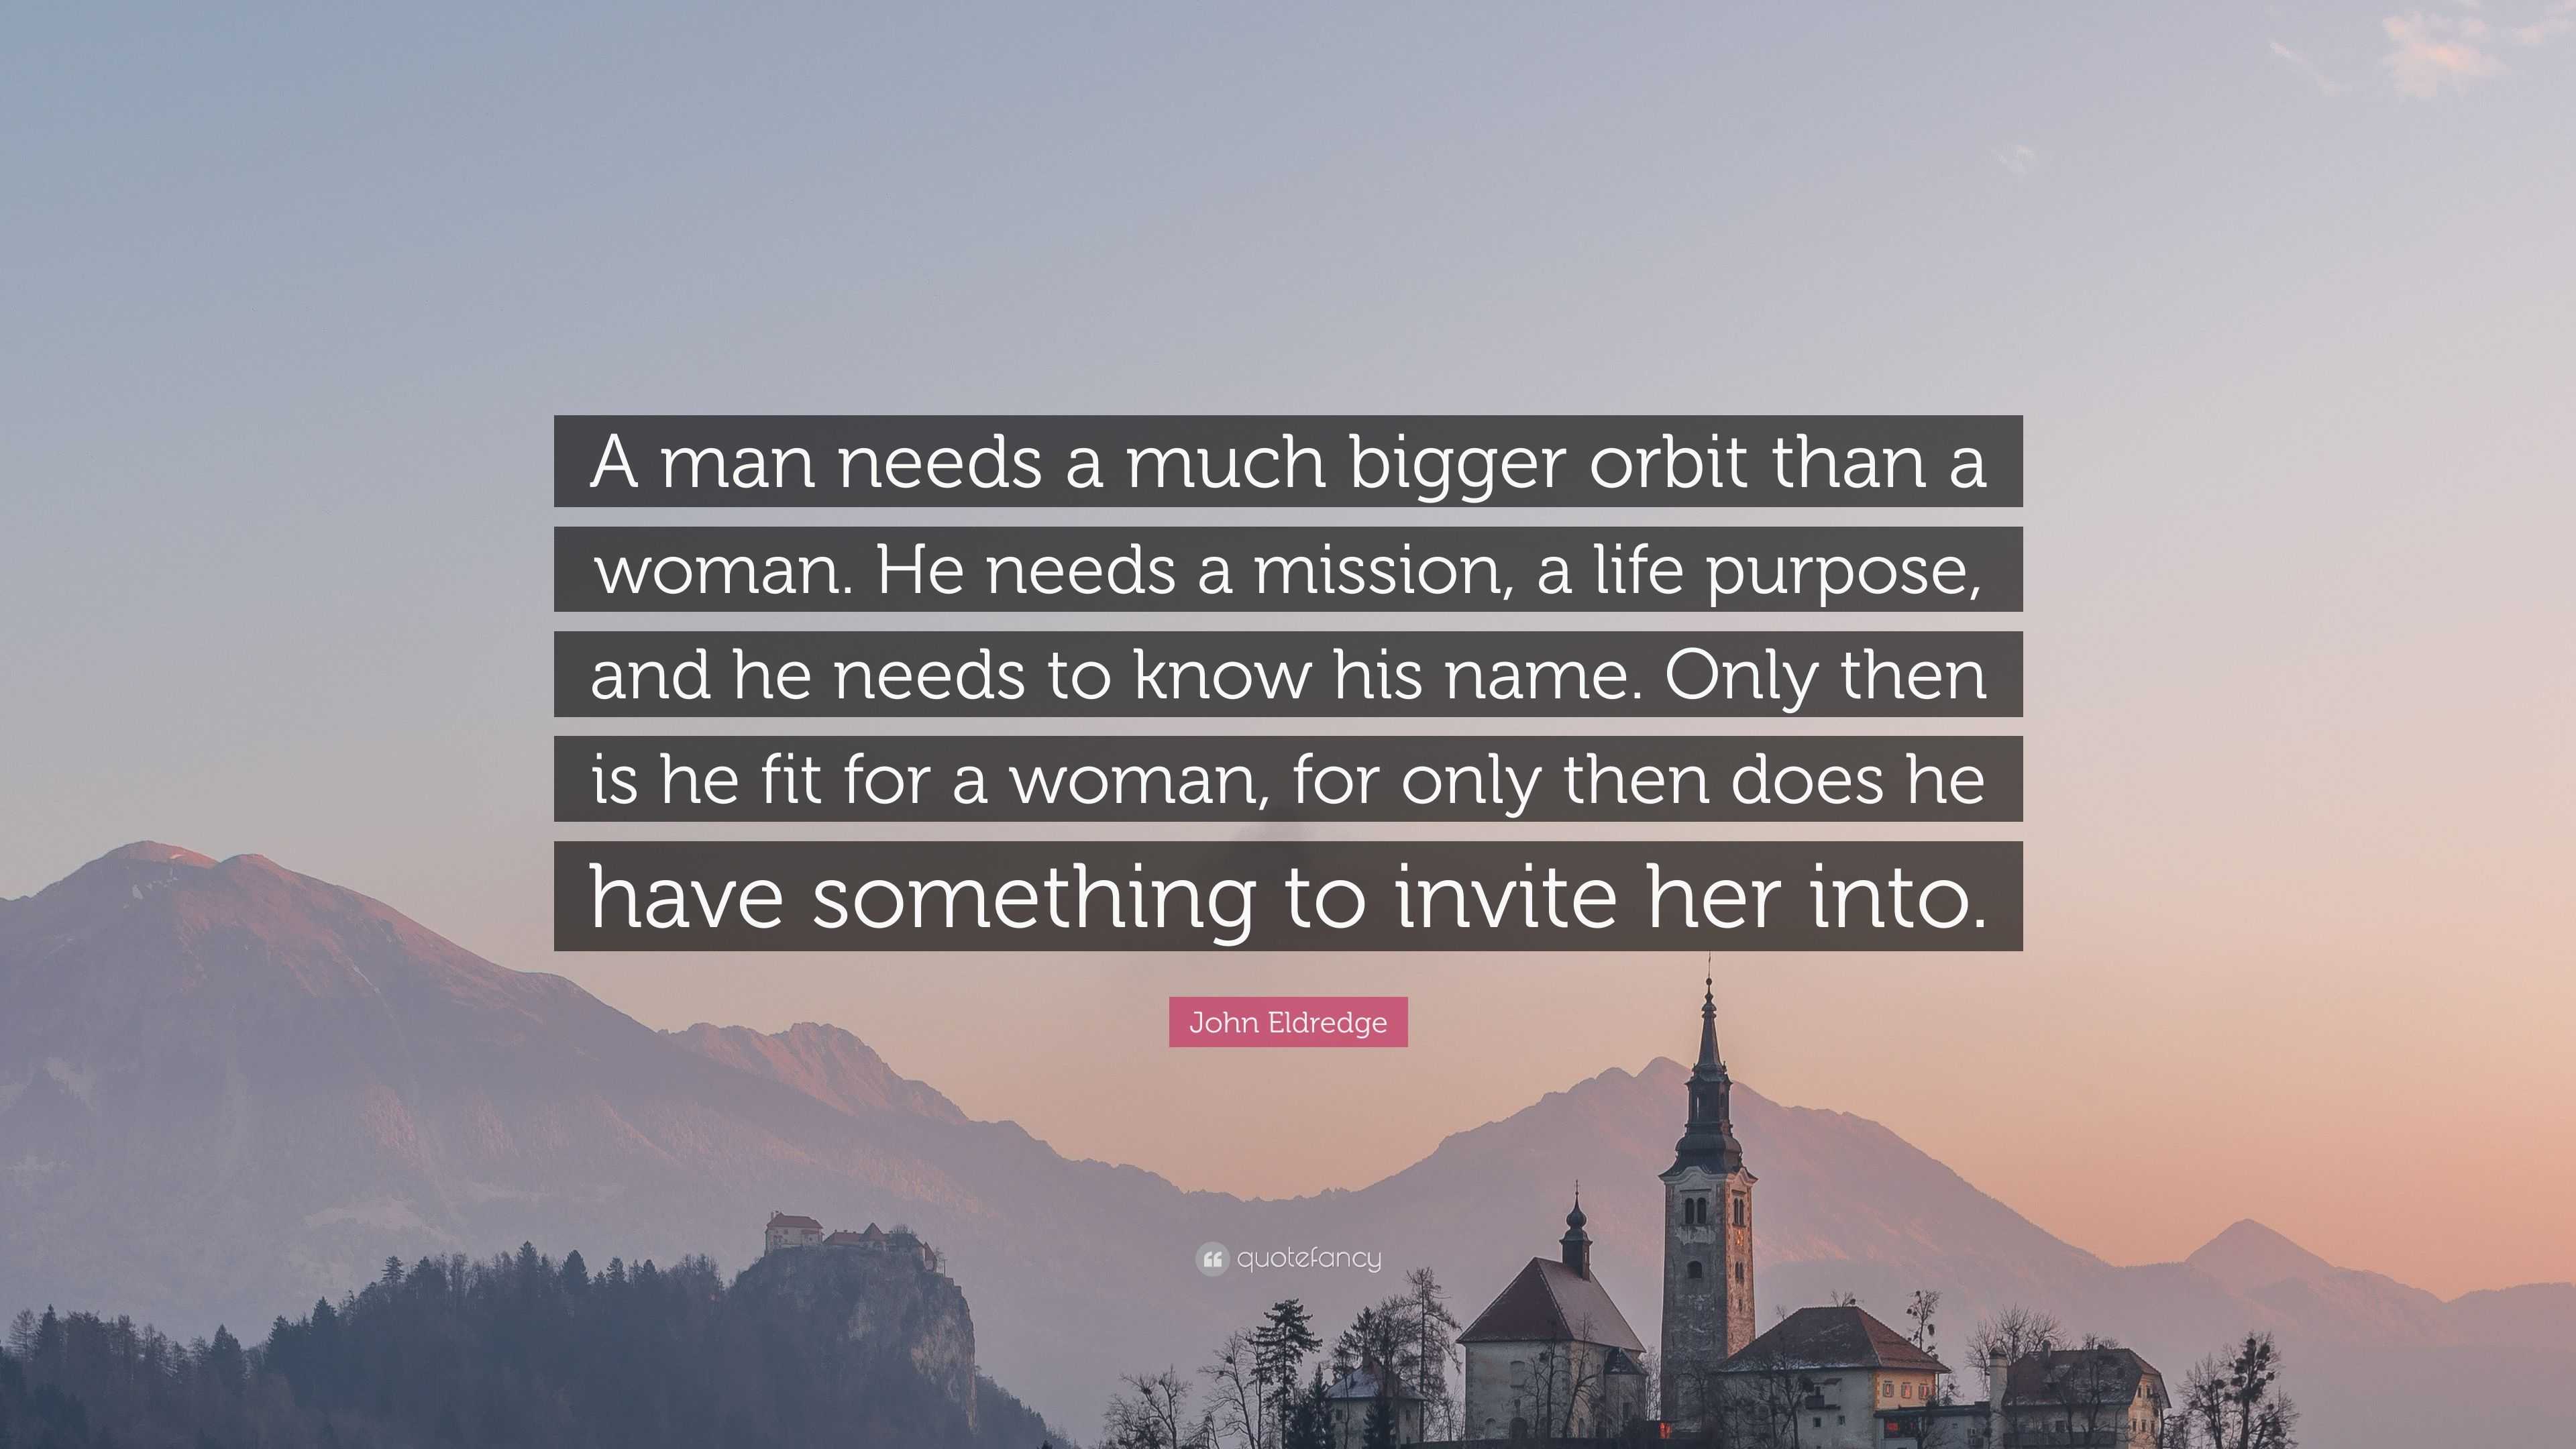 John Eldredge Quote: “A man needs a much bigger orbit than a woman. He  needs a mission, a life purpose, and he needs to know his name. Only th”